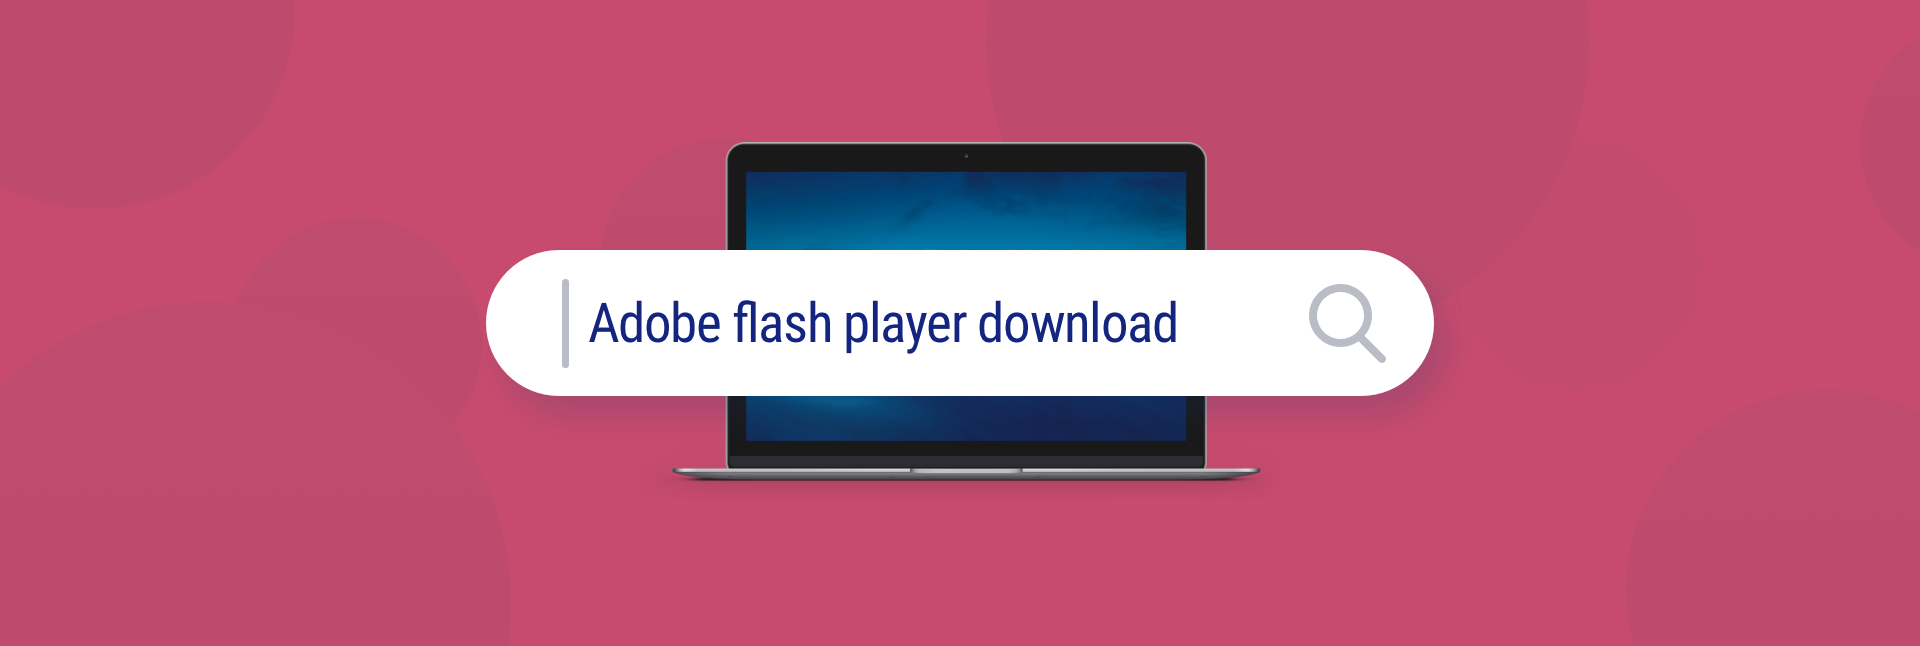 adobe flash player install manager for mac